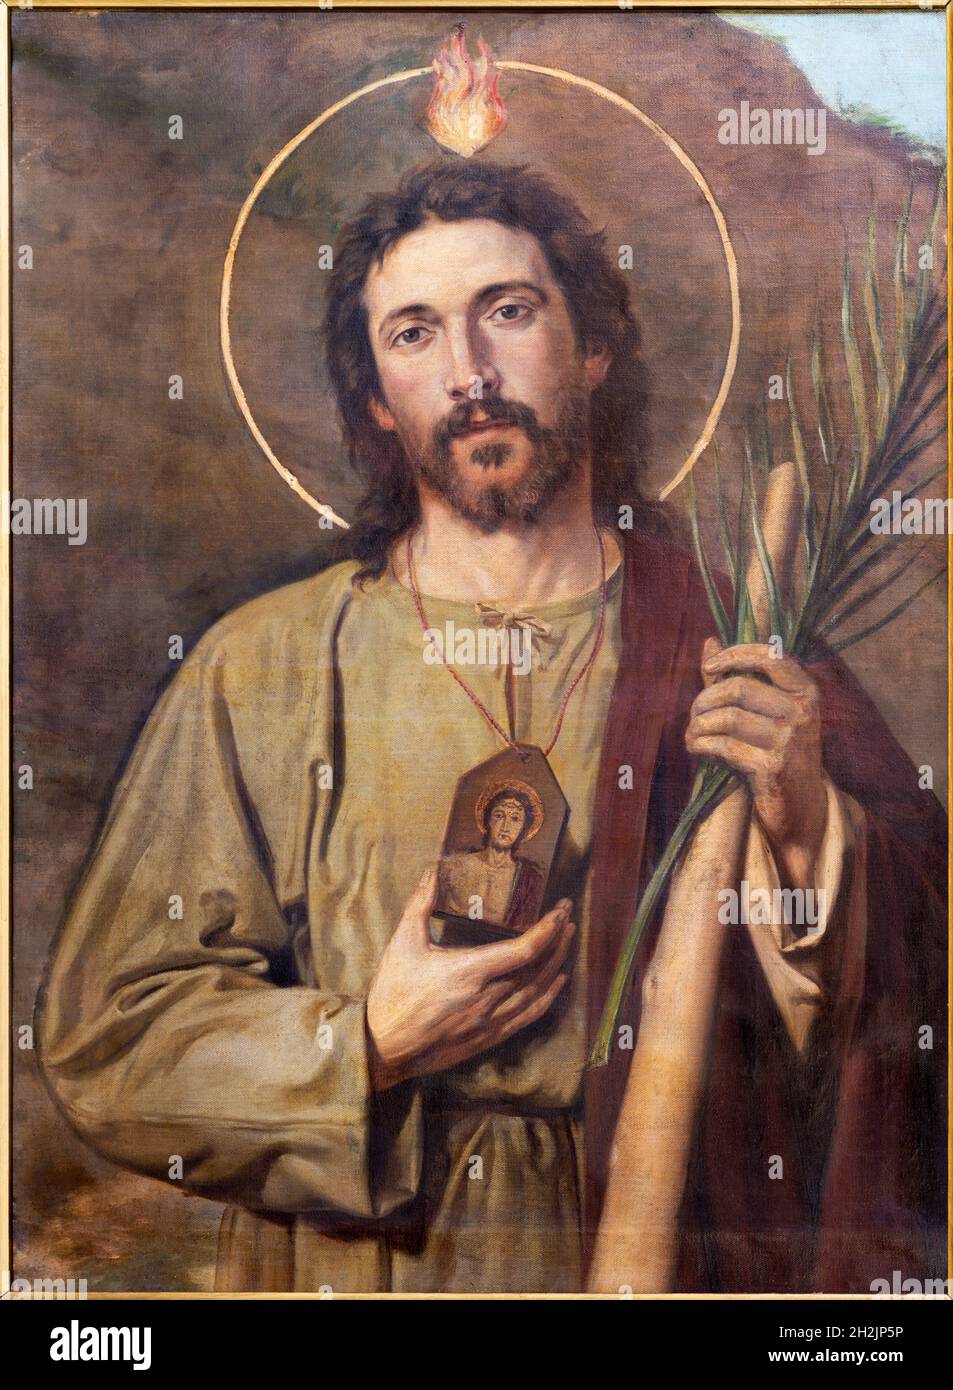 ROME, ITALY - AUGUST 28, 2021: The painting of apostle St. Jude Thaddeus in the church Chiesa dei Santi Vincenzo e Anastasio a Trevi by unknown artist Stock Photo